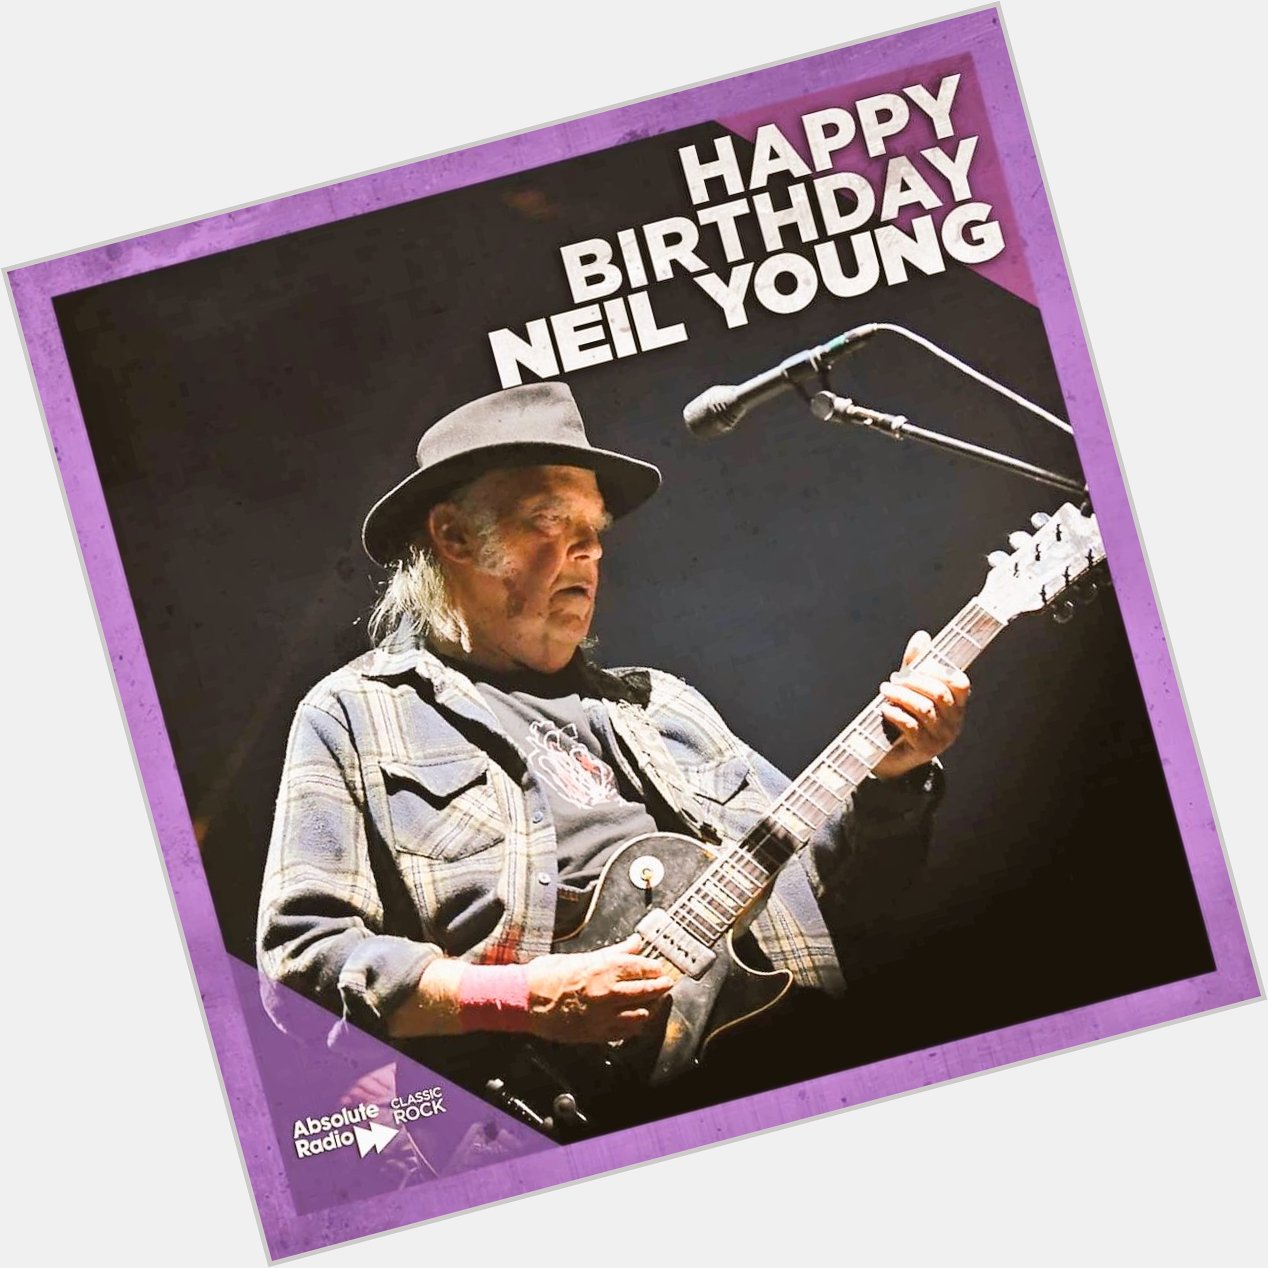   Happy Birthday to Neil Young, born today in 1945 76 